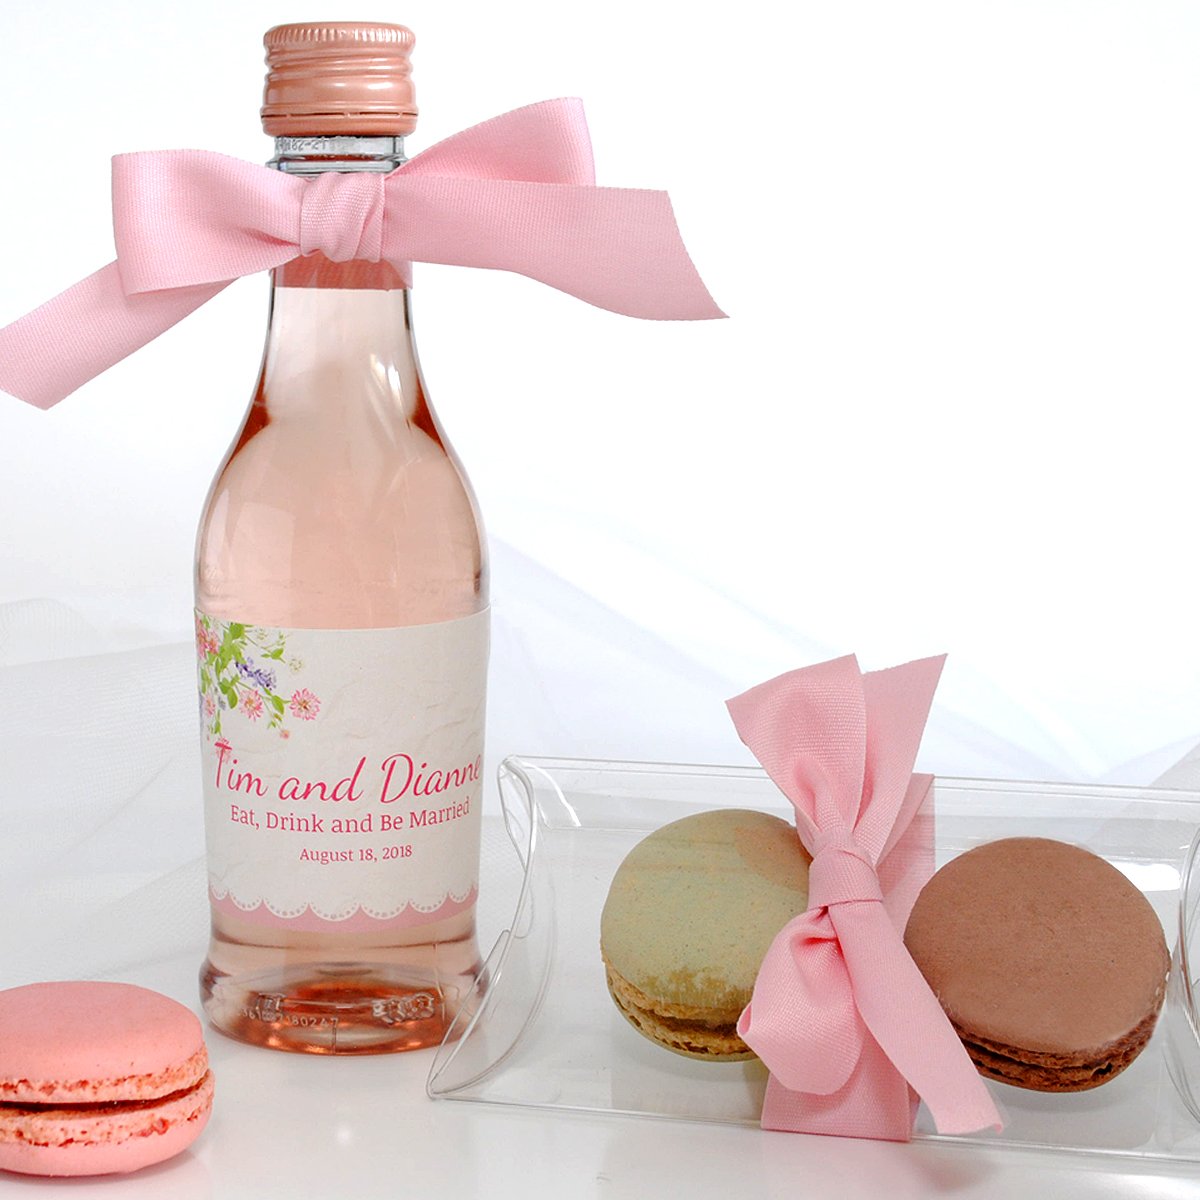 Mini sparkling wine labels and macarons are trending party favors. Make your mini wine labels online.